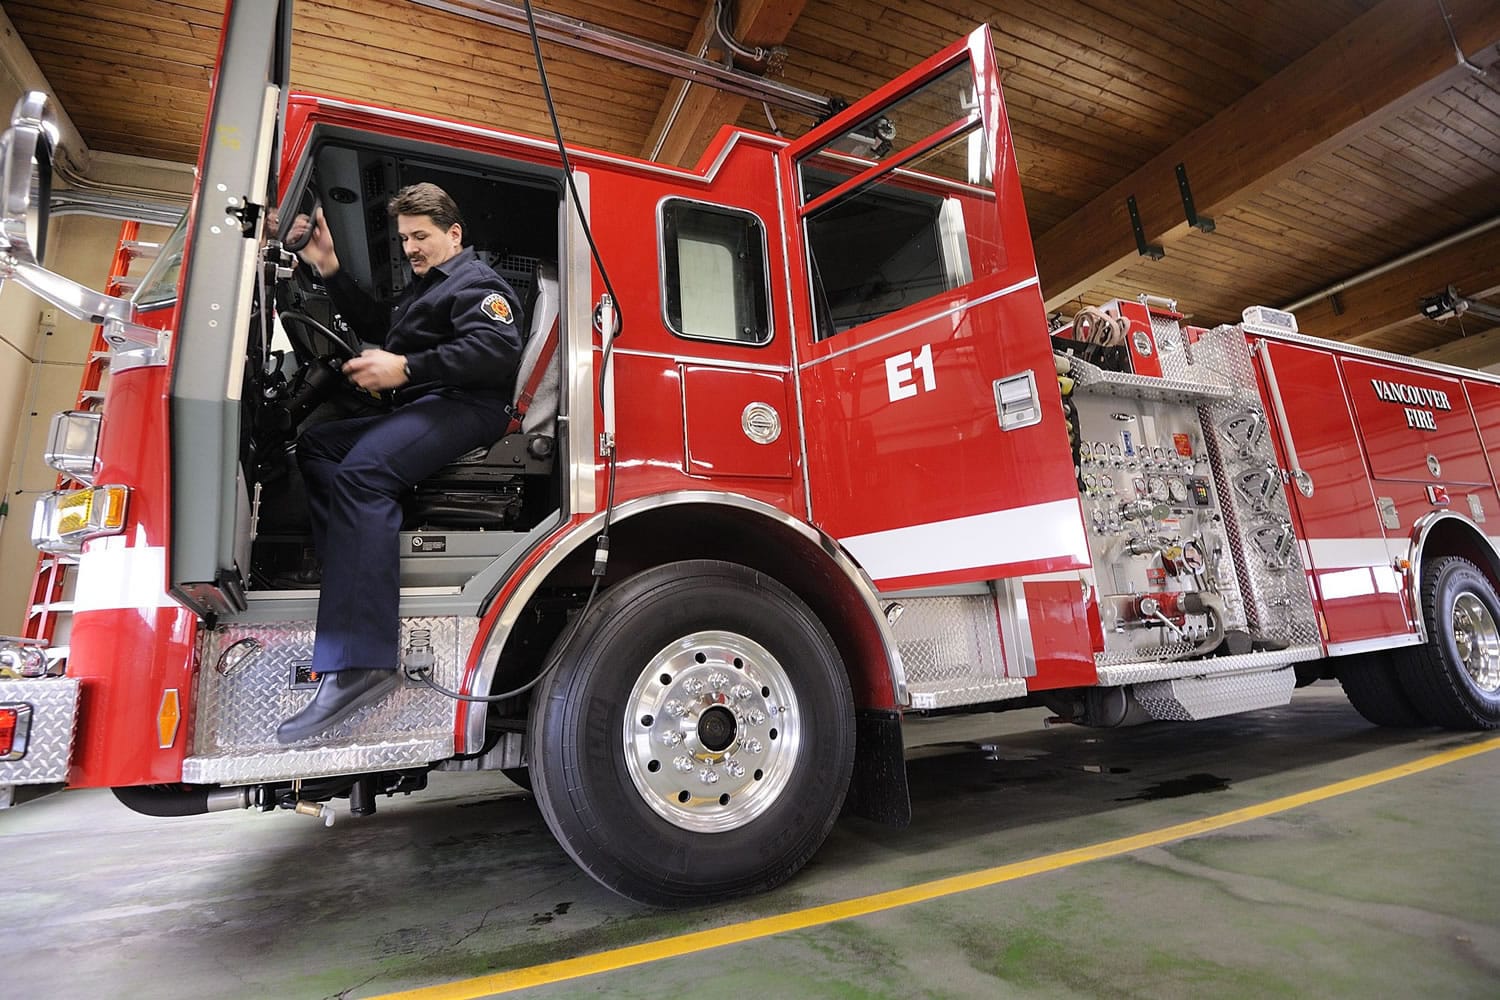 Dan Pearce, captain at Vancouver Fire Station 1, climbs out of his station's new engine on Tuesday.